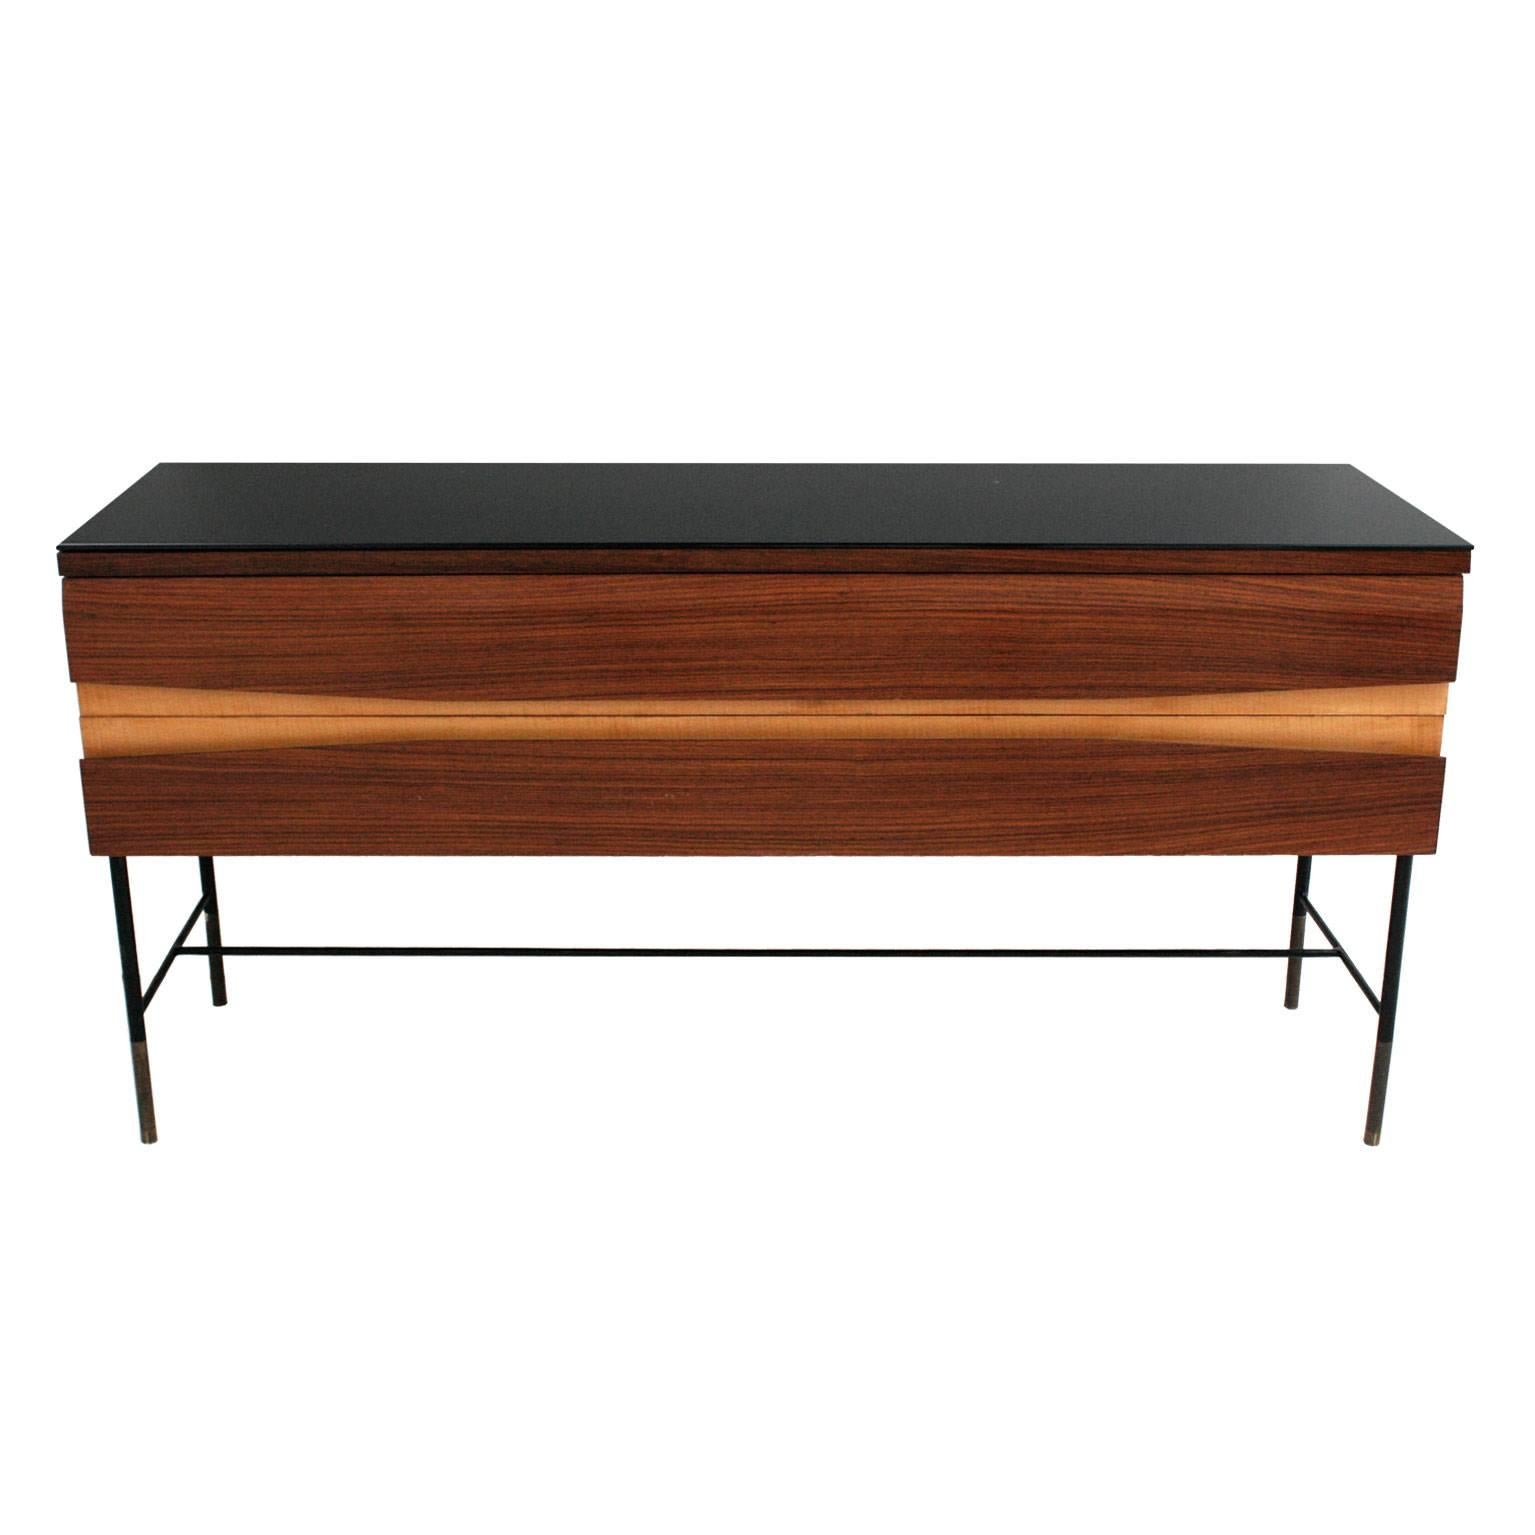 Sideboard made in solid wood covered in rosewood and birch. Legs with metalic structure with brass sheath. Black lacquered crystal on top.
 